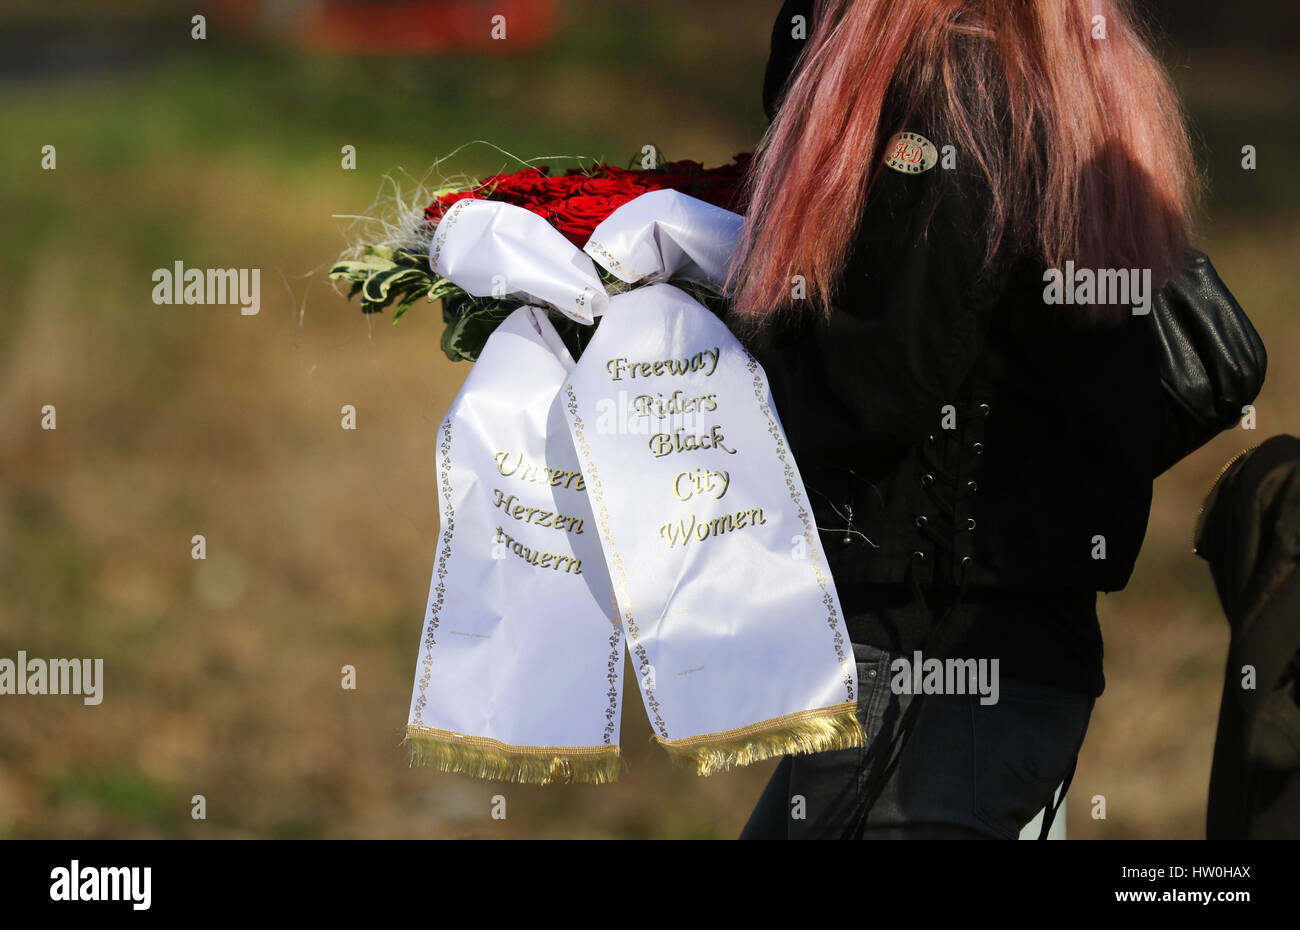 Herten, Germany. 16th Mar, 2017. A woman carries a wreath reading 'Unsere Herzen trauern' (lit. 'Our hearts mourn') and 'Freeway Riders Black City Women' at the burial of nine-year-old Jaden, one of the two victims of the double homicide of Herne, in Herten, Germany, 16 March 2017. A 19-year-old confessed to the two murders. Photo: Ina Fassbender/dpa/Alamy Live News Stock Photo